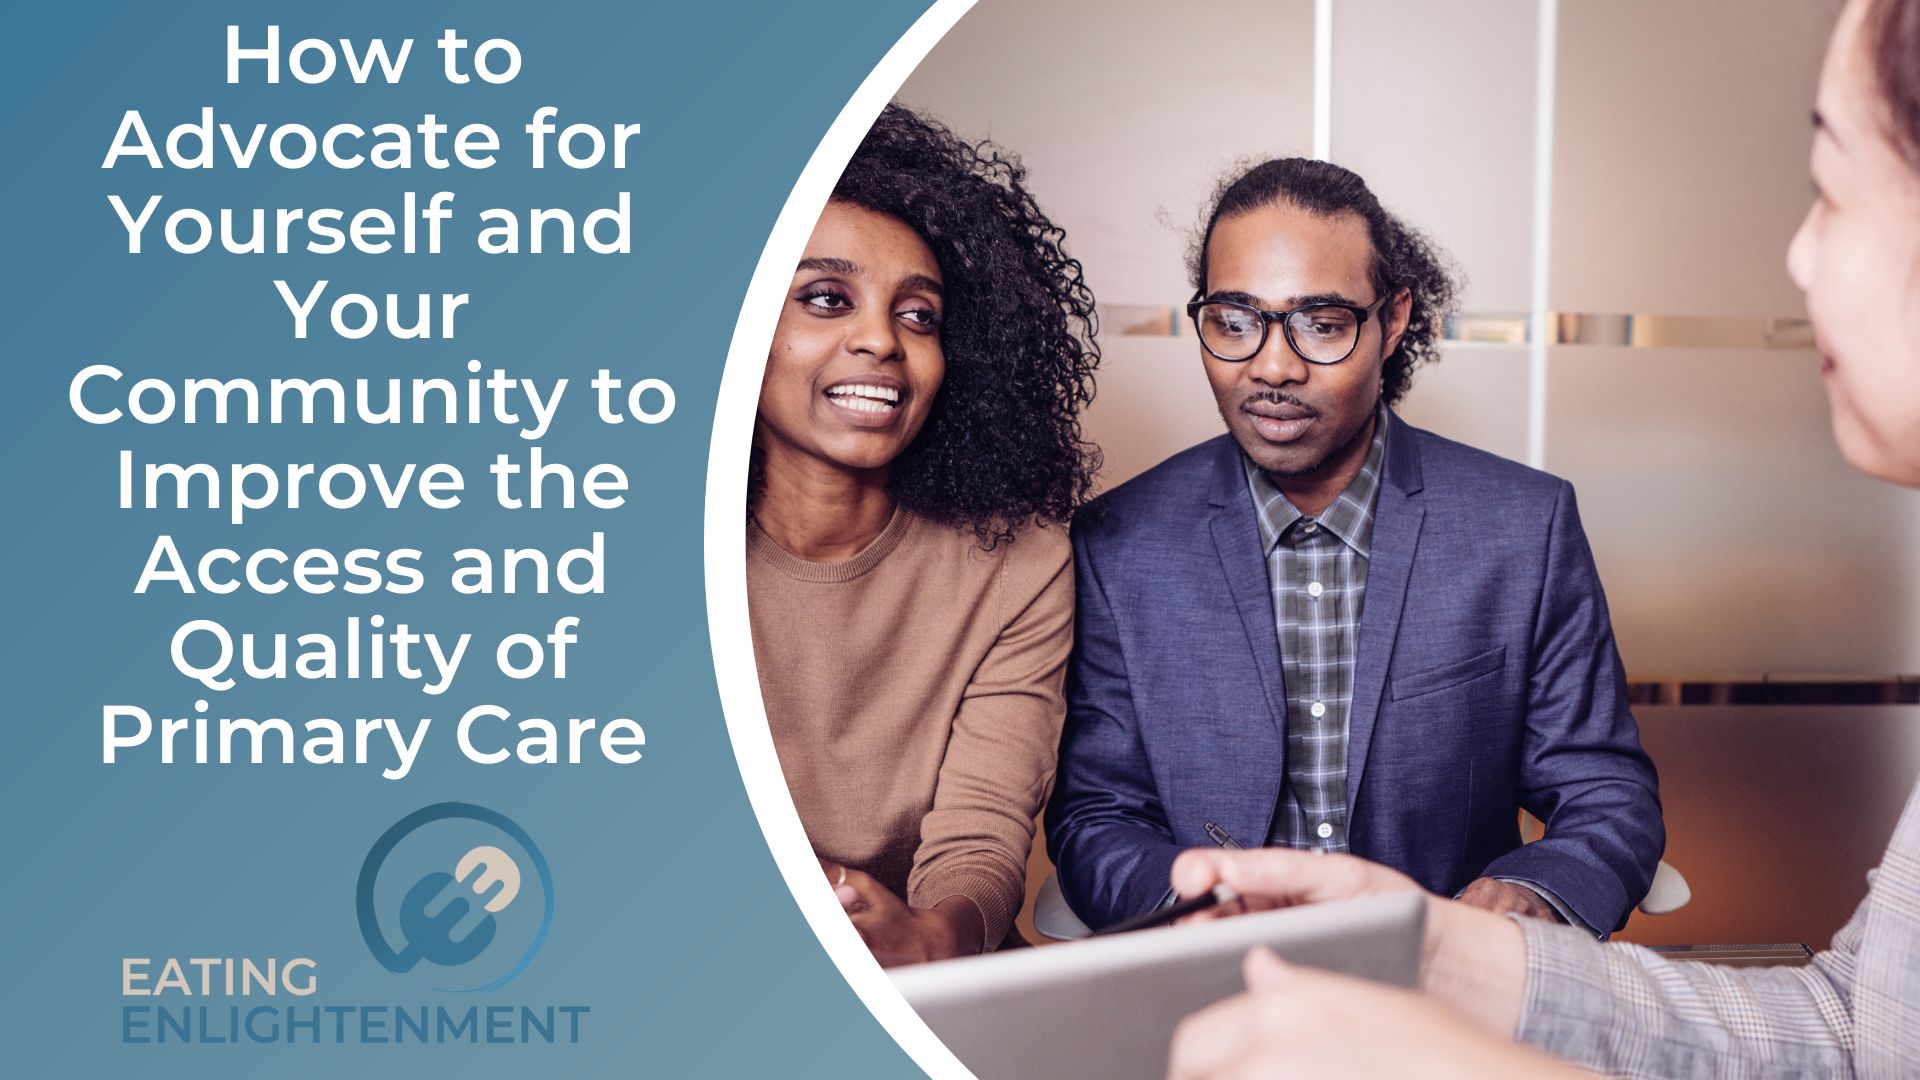 How to Advocate for Yourself and Your Community to Improve the Access and Quality of Primary Care